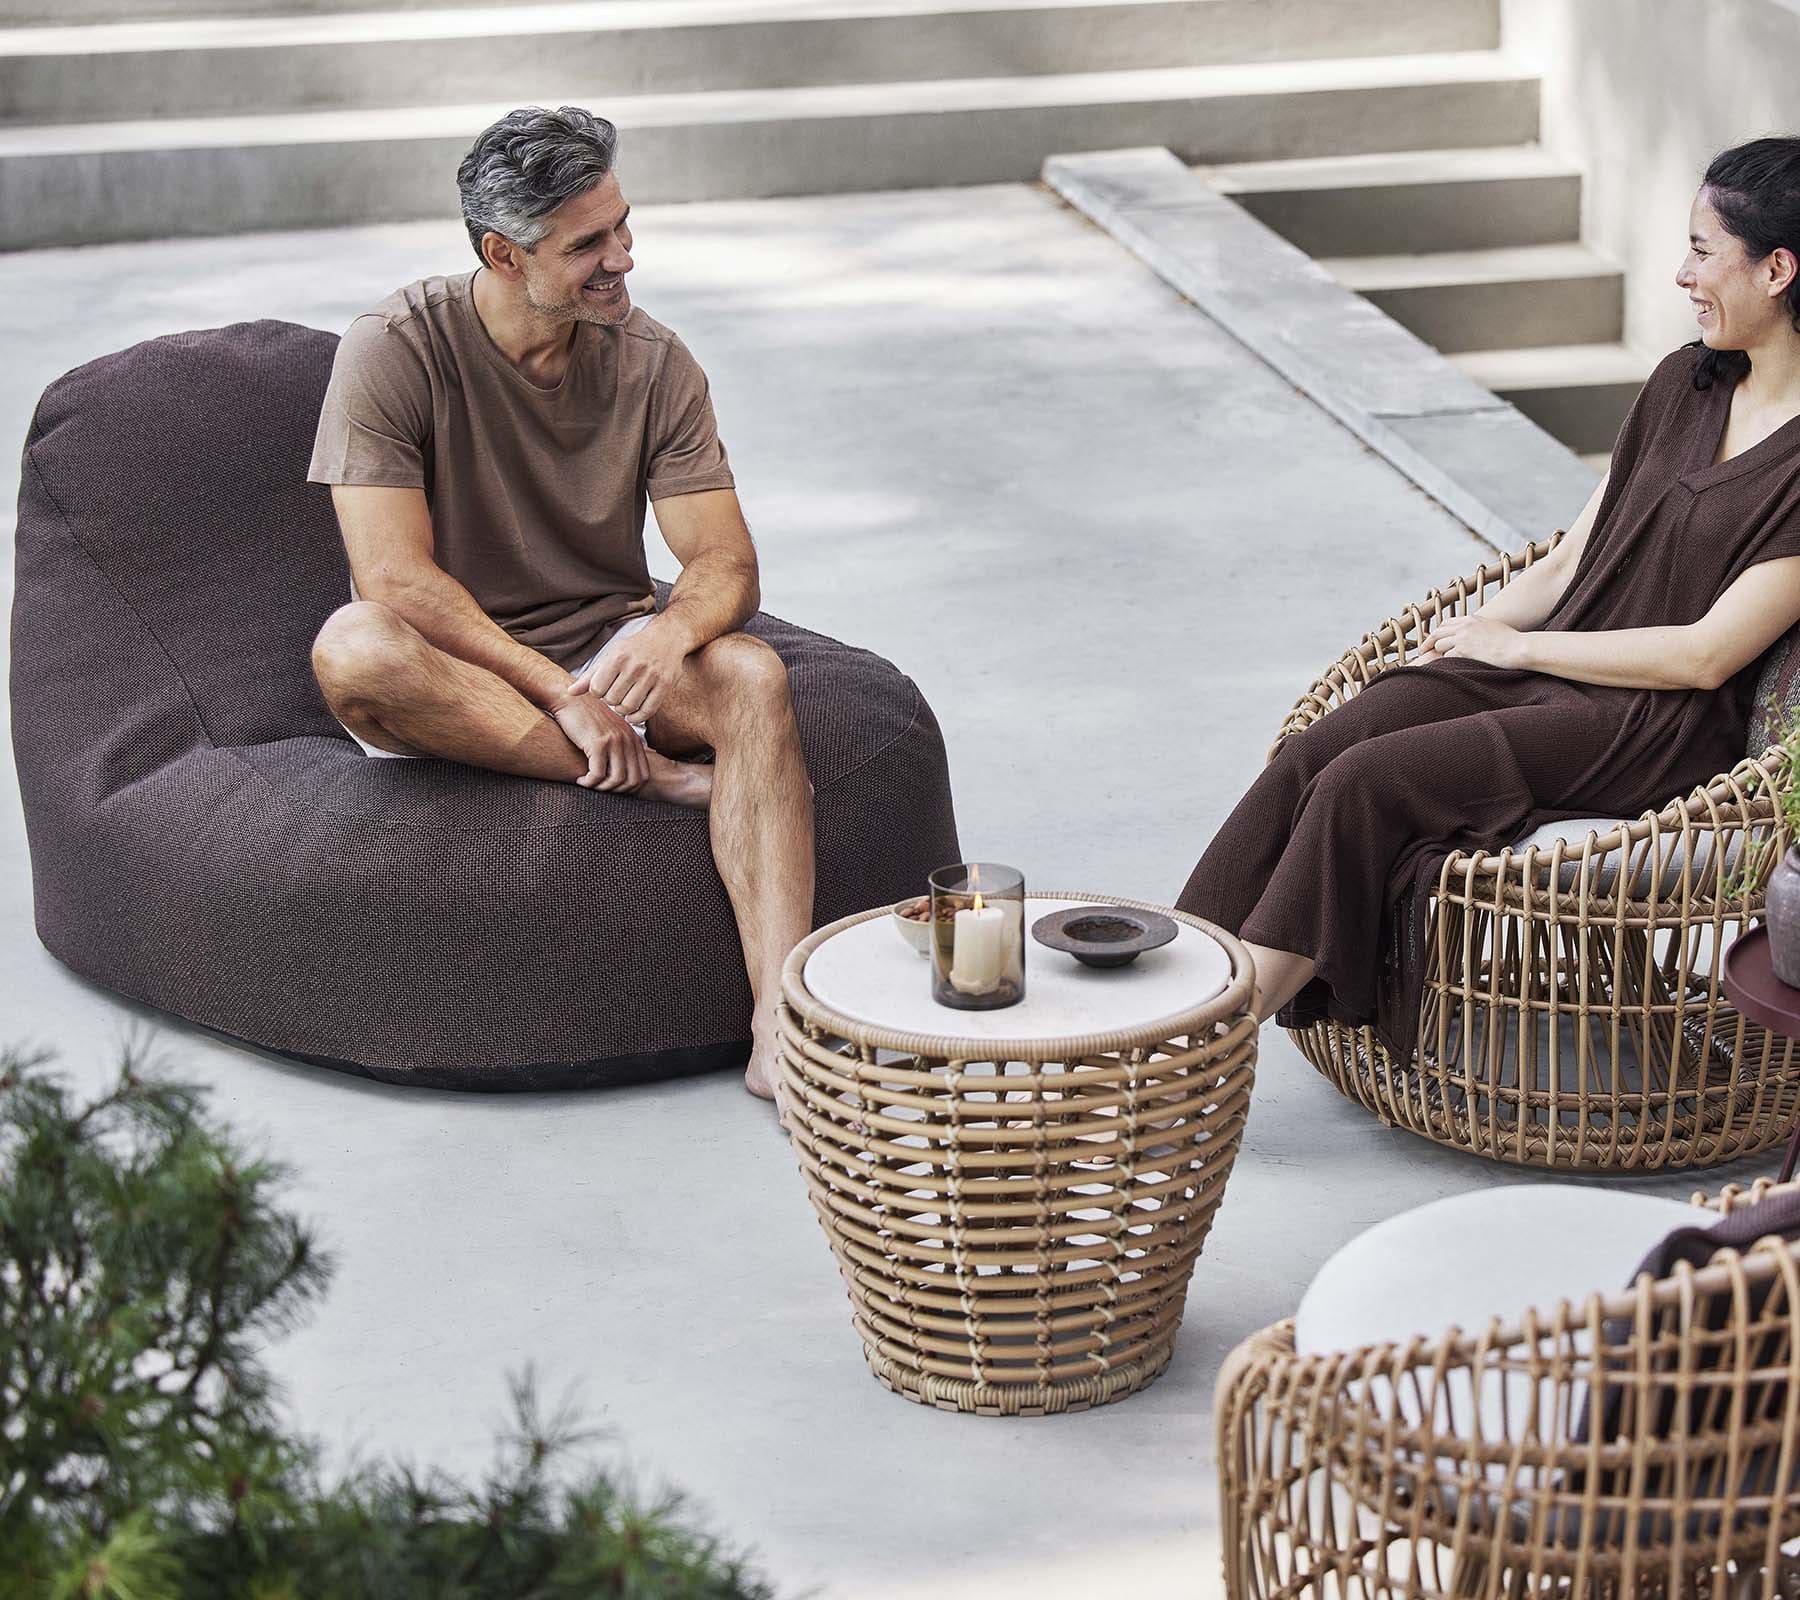 Boxhill's Cozy Outdoor Bean Bag Chair Dark Bordeaux lifestyle image with a man and a woman sitting down